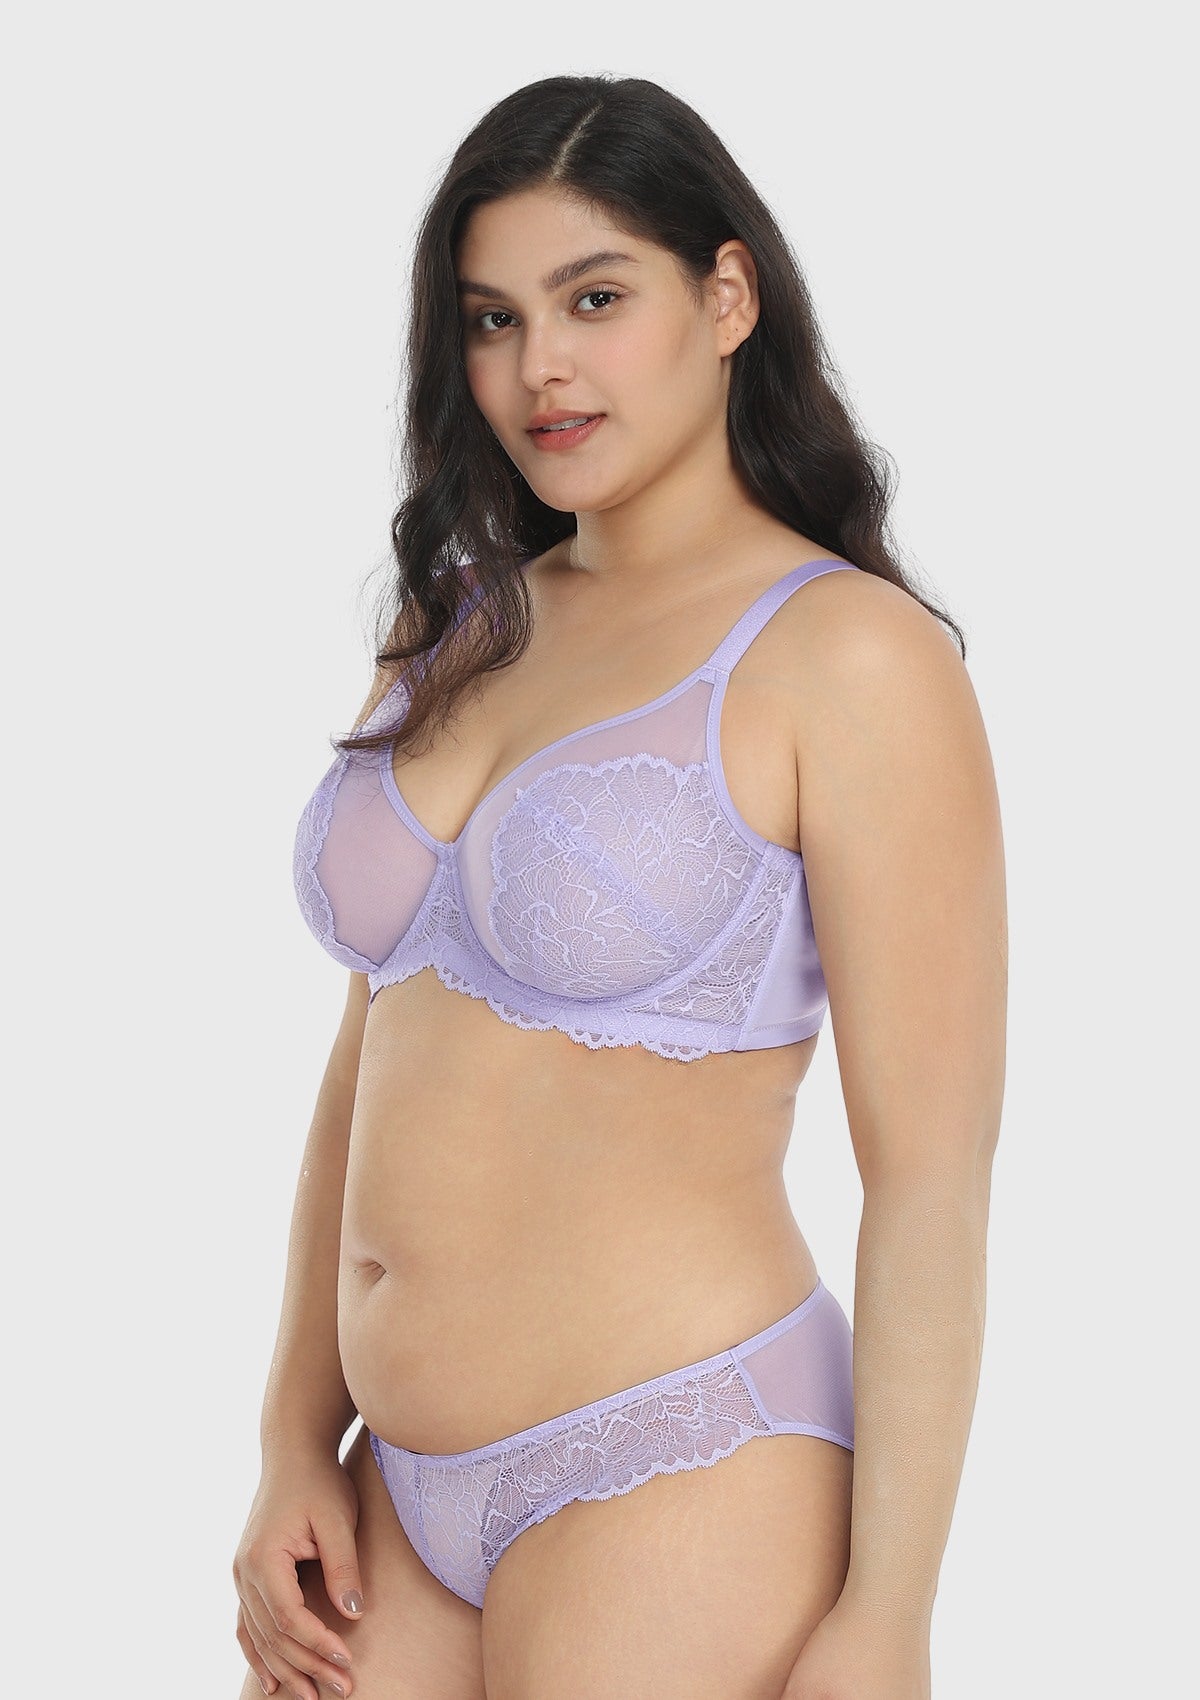 HSIA Blossom Transparent Lace Bra: Plus Size Wired Back Smoothing Bra - Light Purple / 38 / I